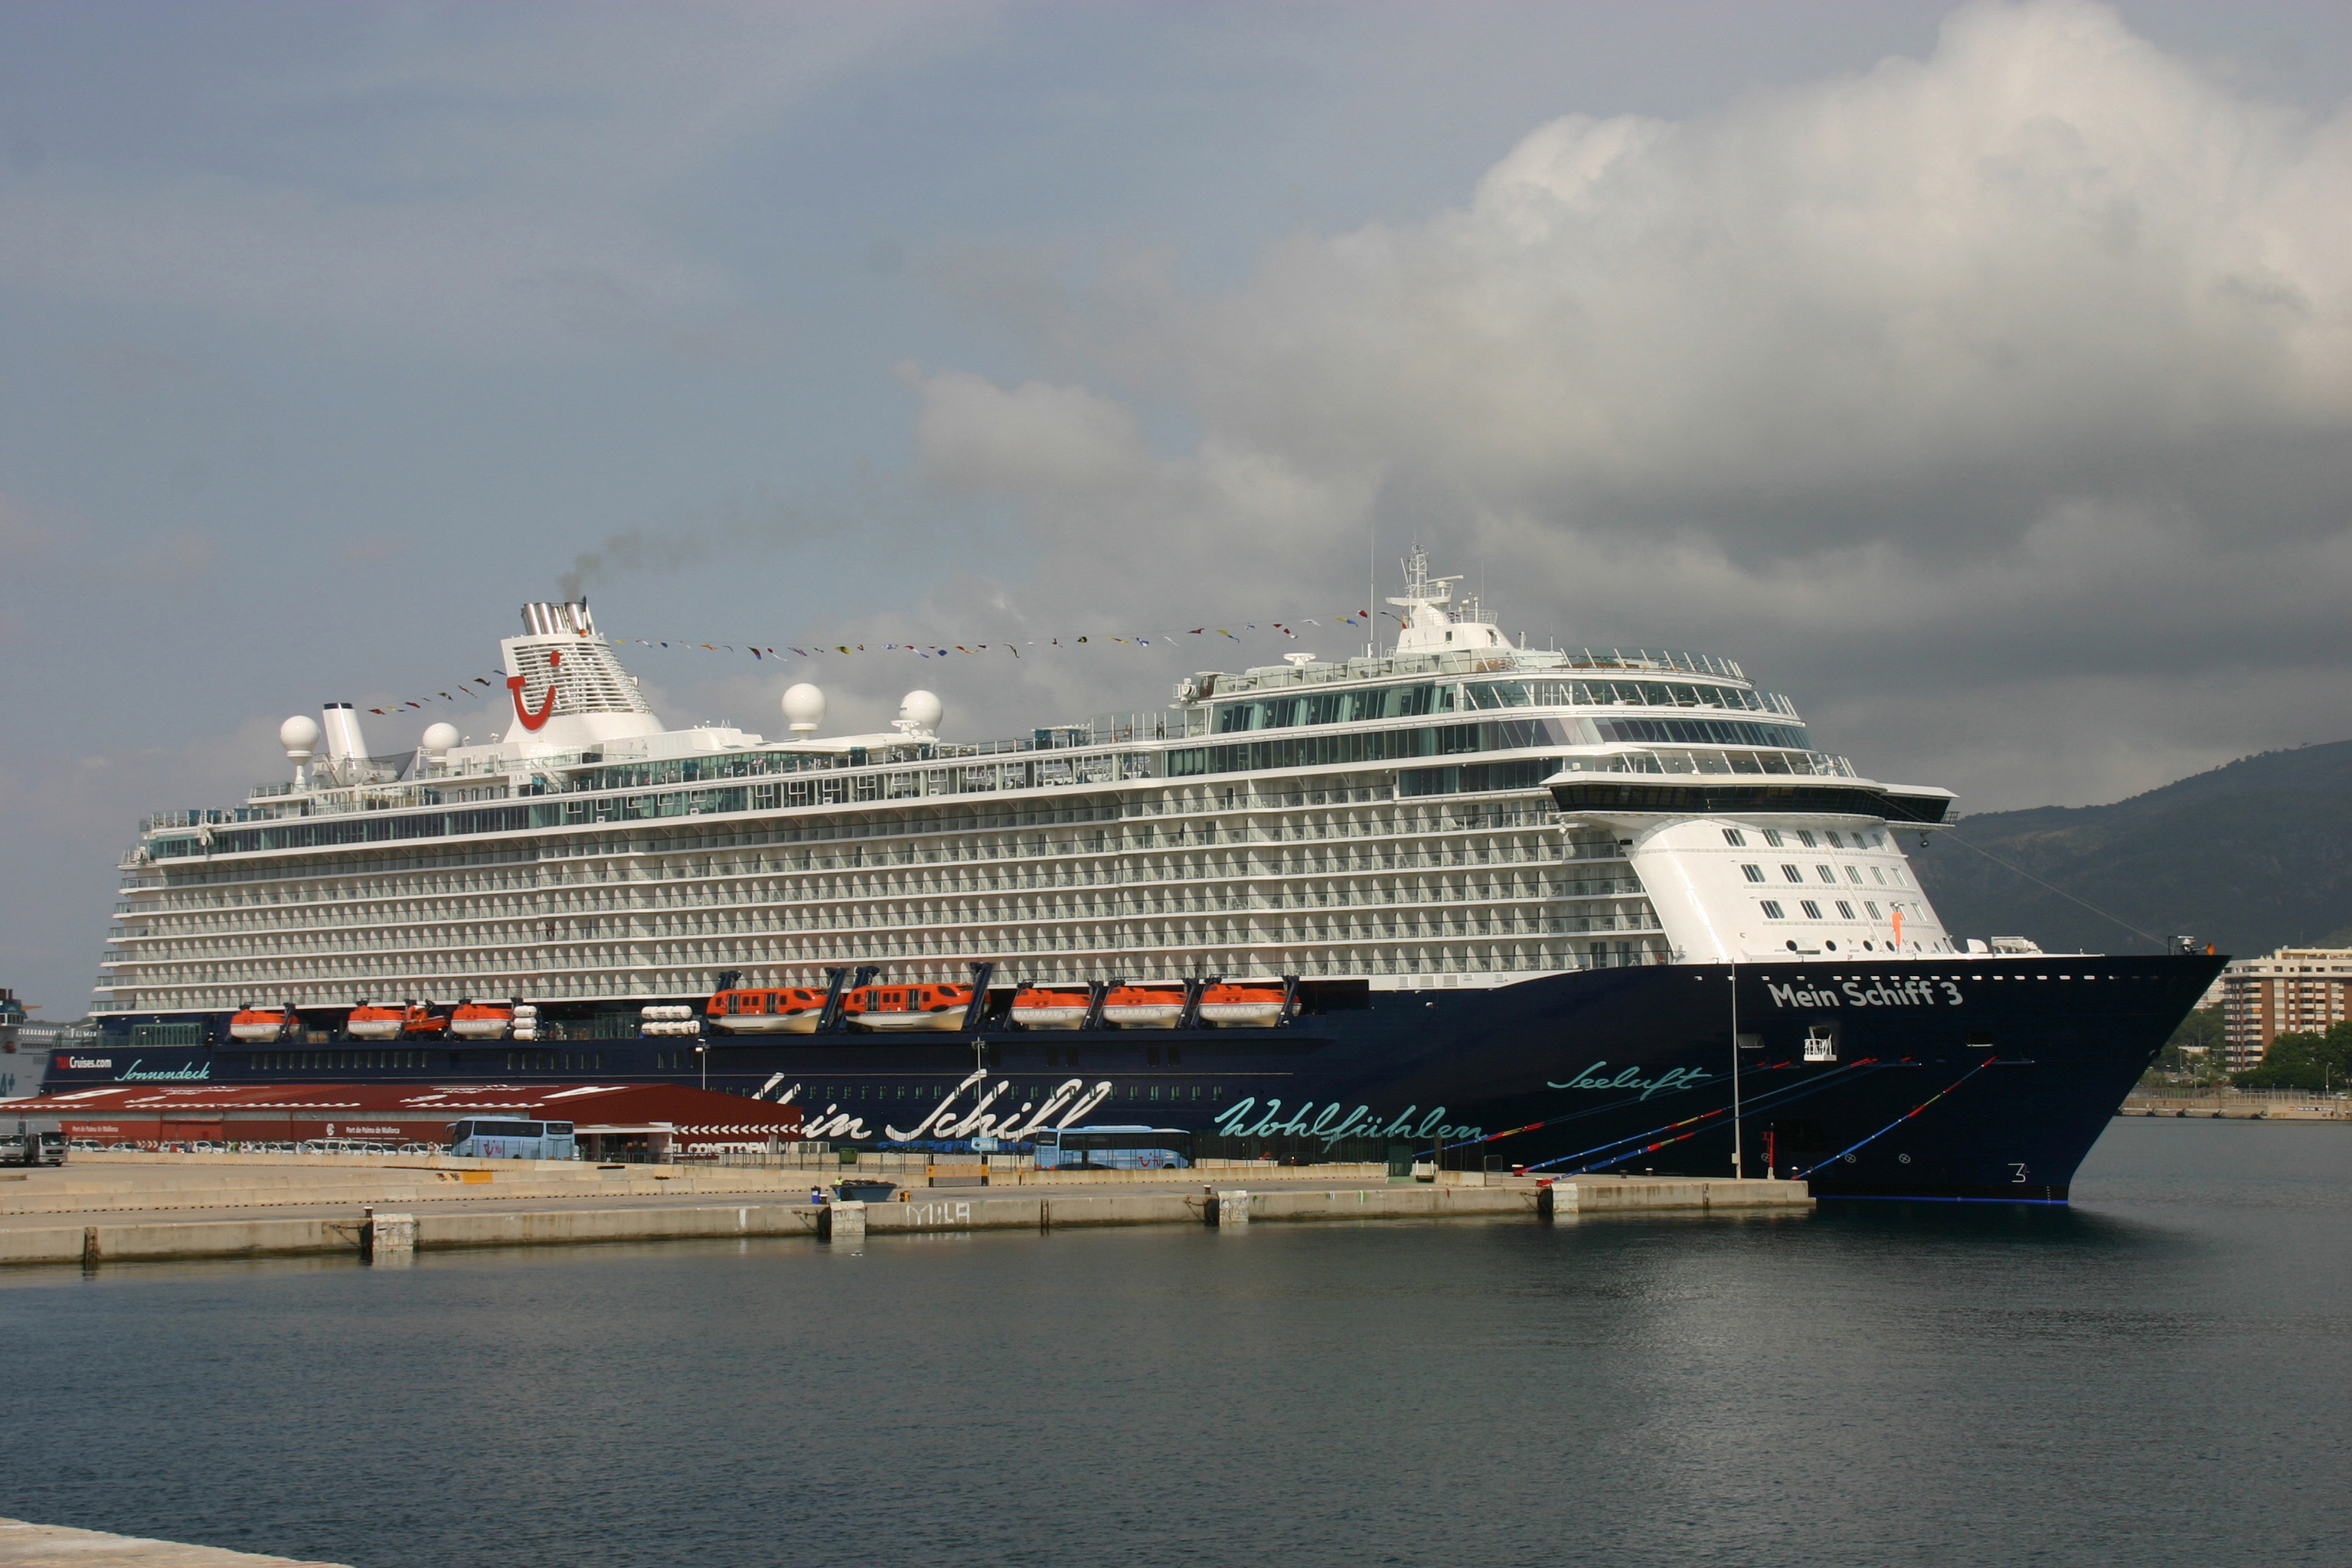 The five TUI ship cruises will be based in Palma in 2016